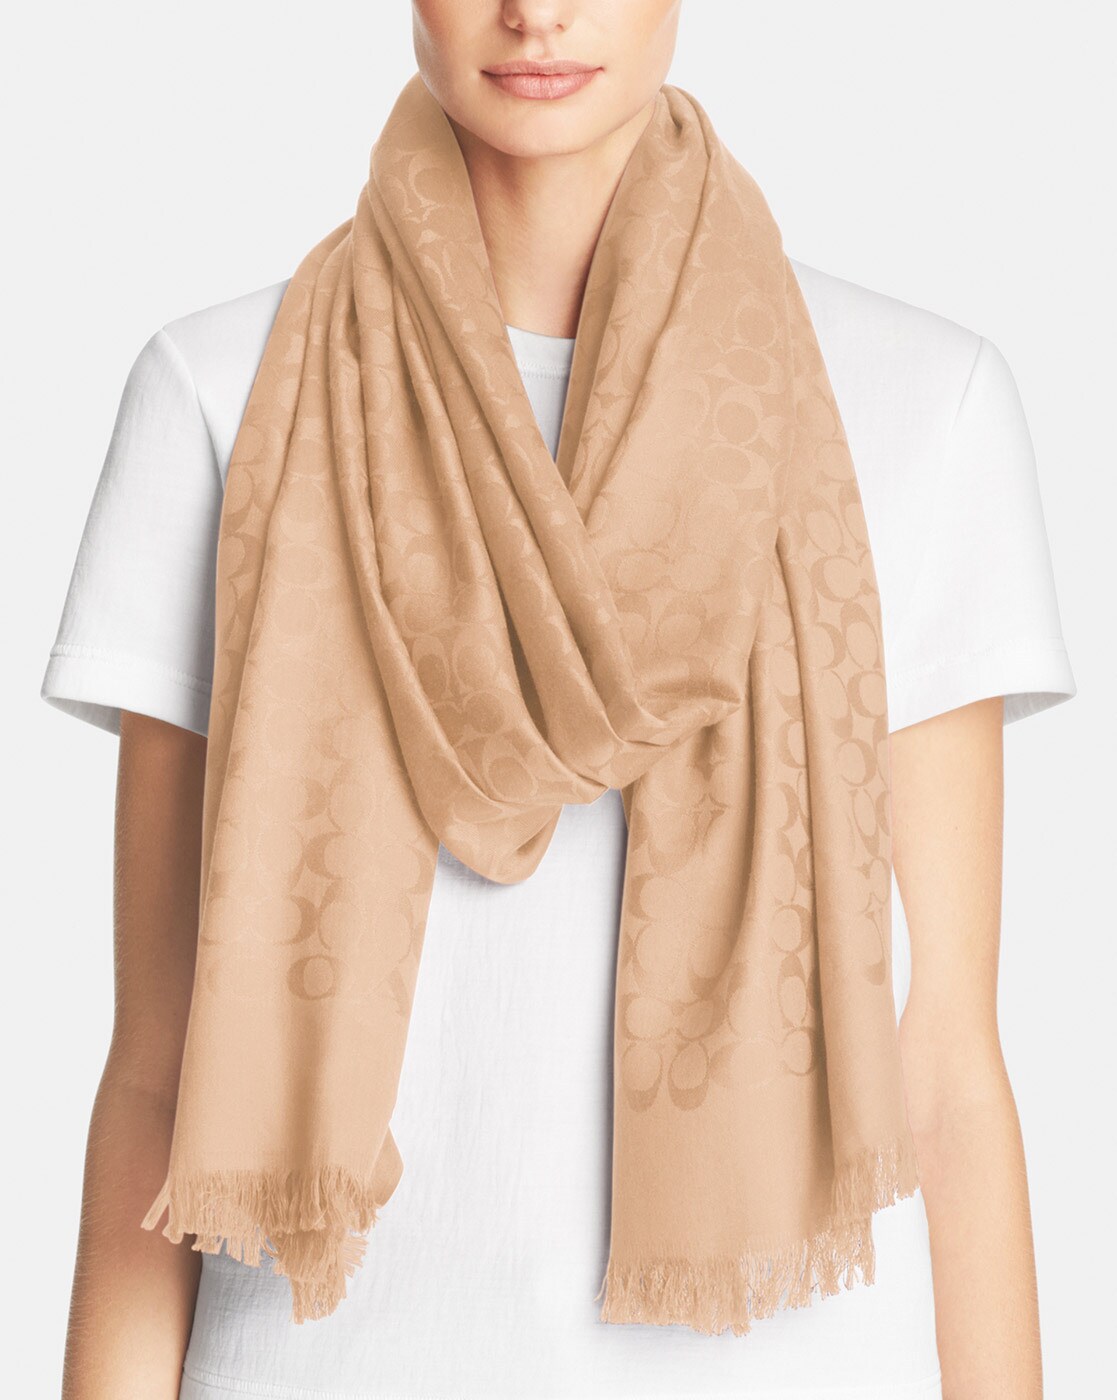 KHĂN CHOÀNG CỔ COACH MÀU BE CHAMPAGNE SIGNATURE TEXTURED STOLE WITH TASSELS 3